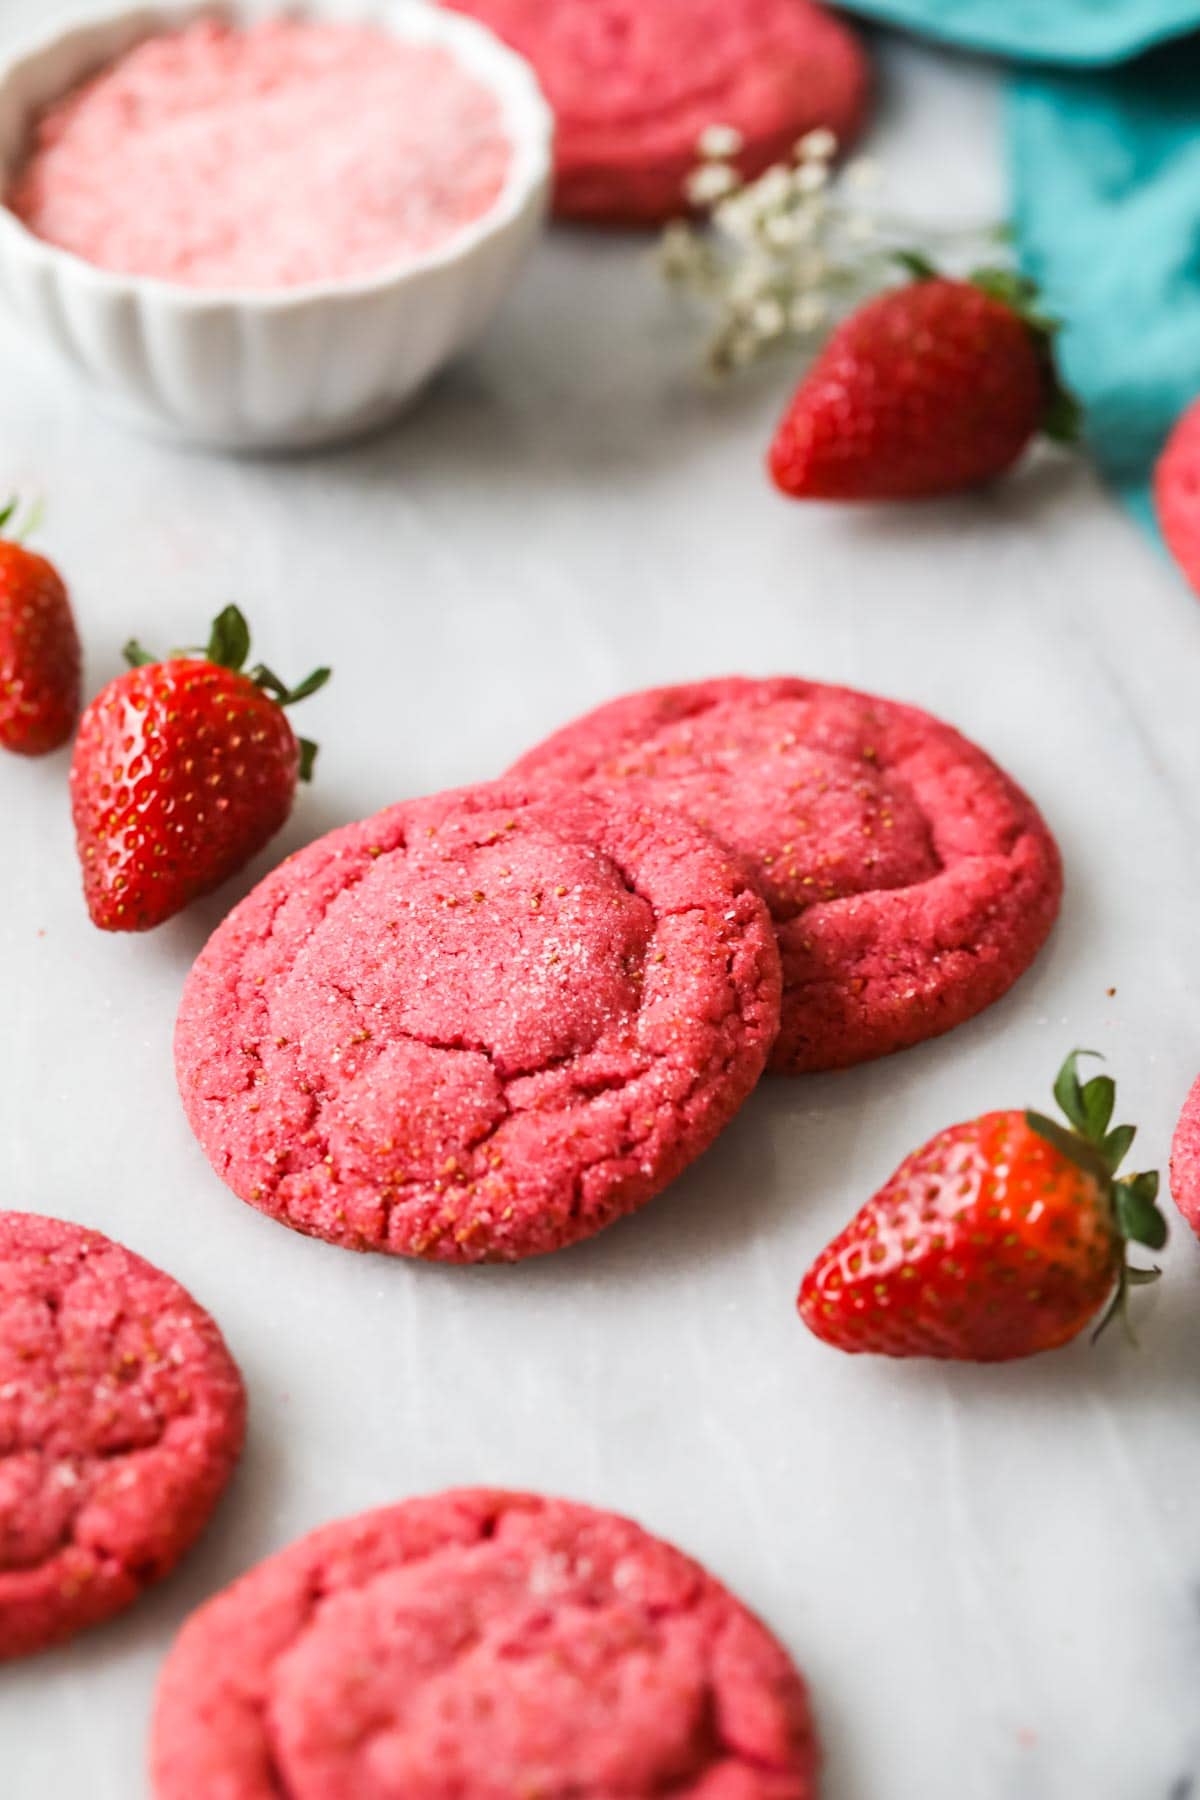 Round pink cookies made with freeze dried strawberries on a white countertop.